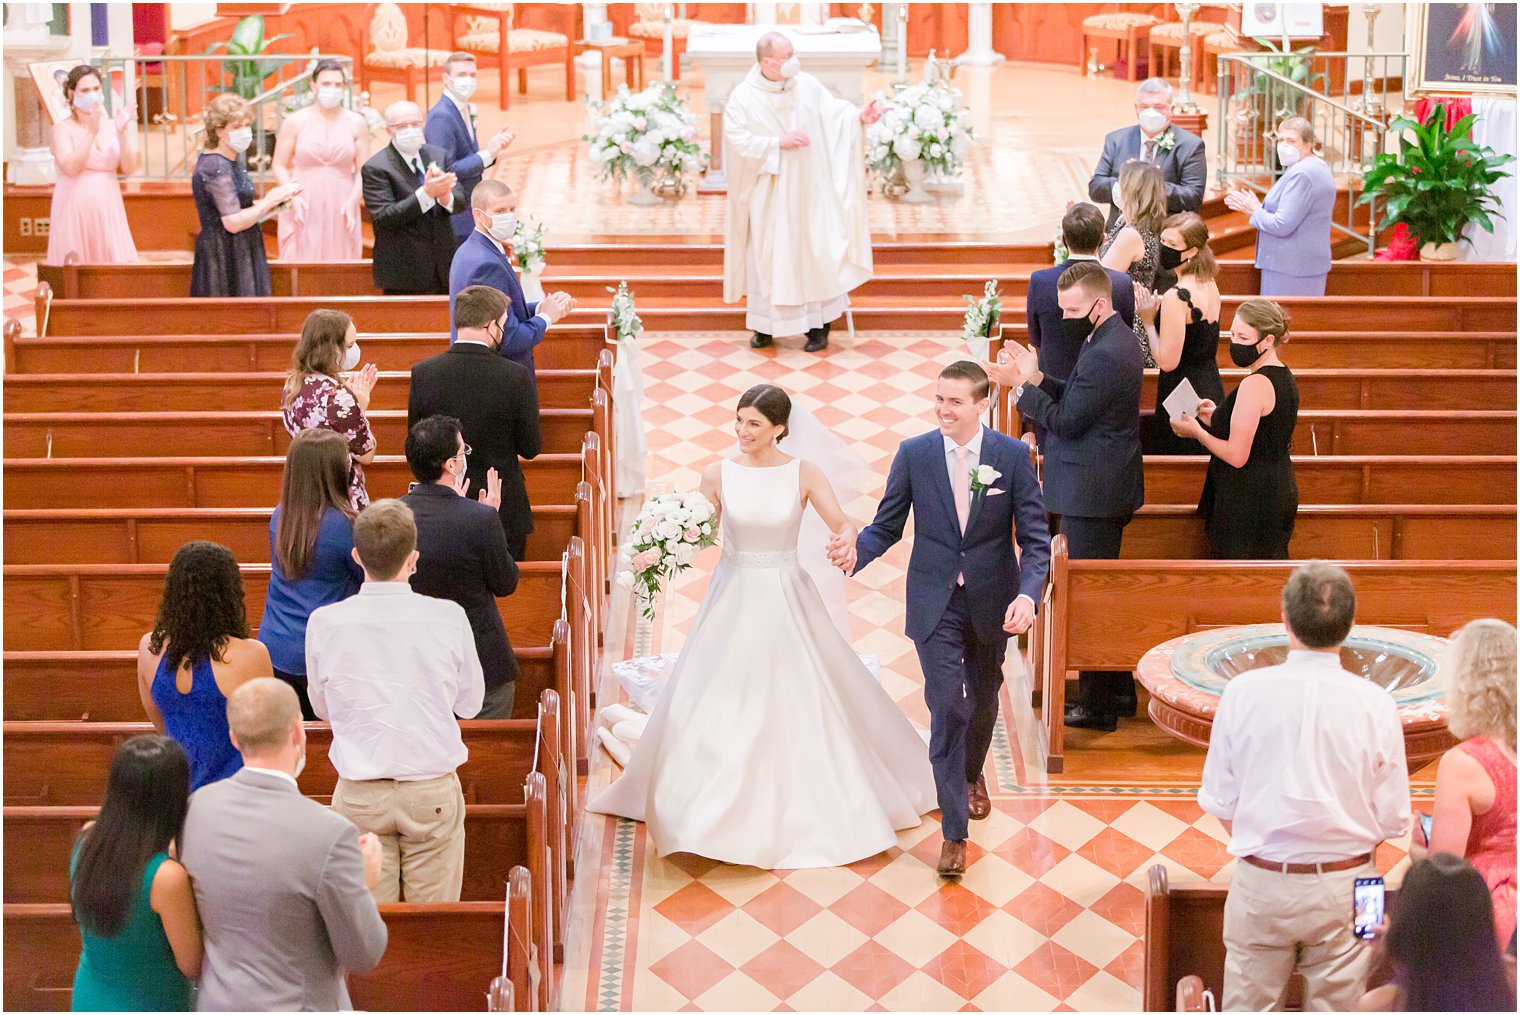 Wedding ceremony recessional at Church of the Assumption in Morristown, NJ